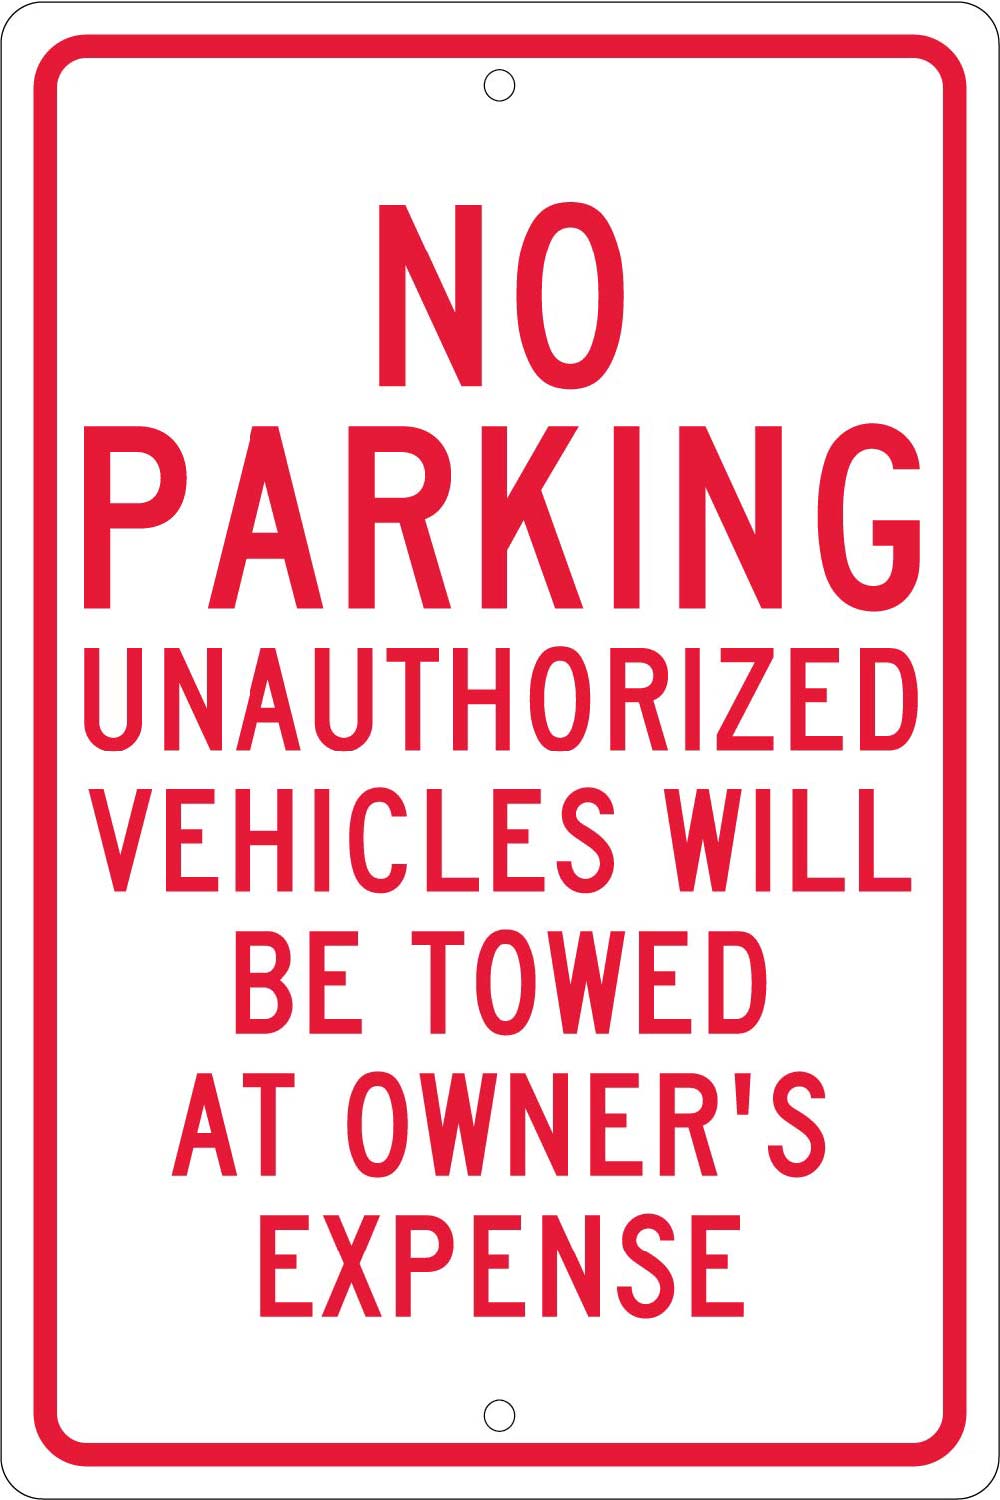 No Parking Unauthorized Vehicles Will Be Towed Sign-eSafety Supplies, Inc